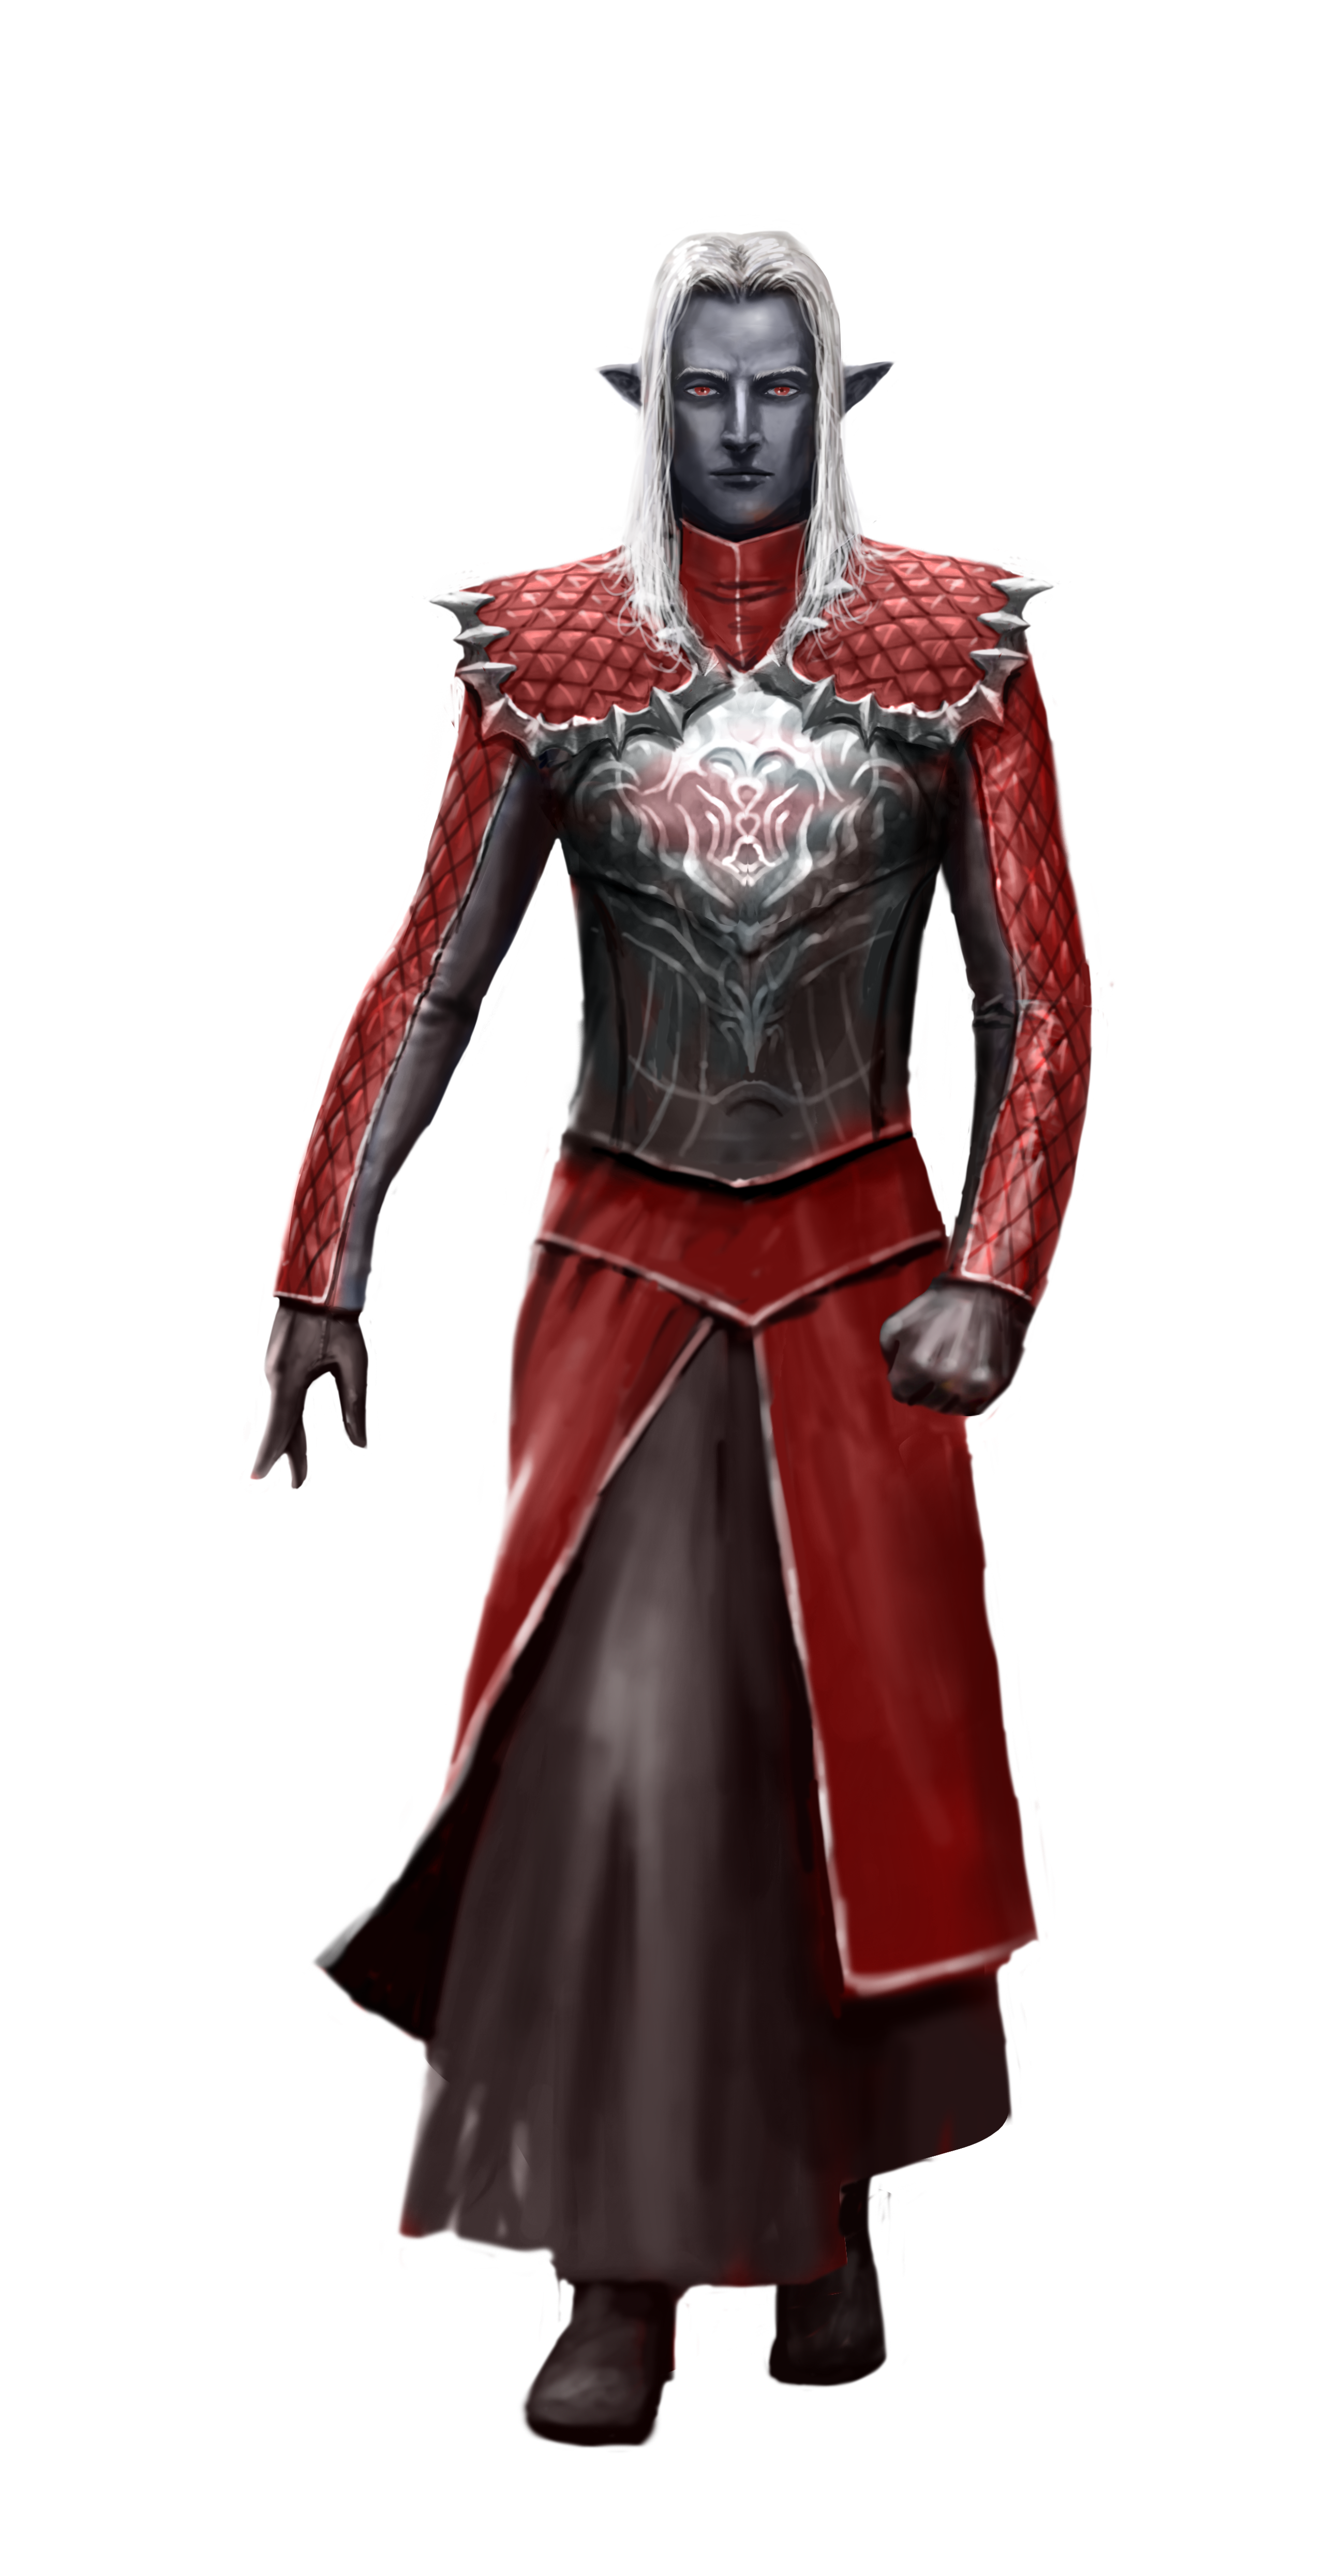 Vae’rin Culture and Living in the Evernight as a Dark Elf & Evernight Encounter Table